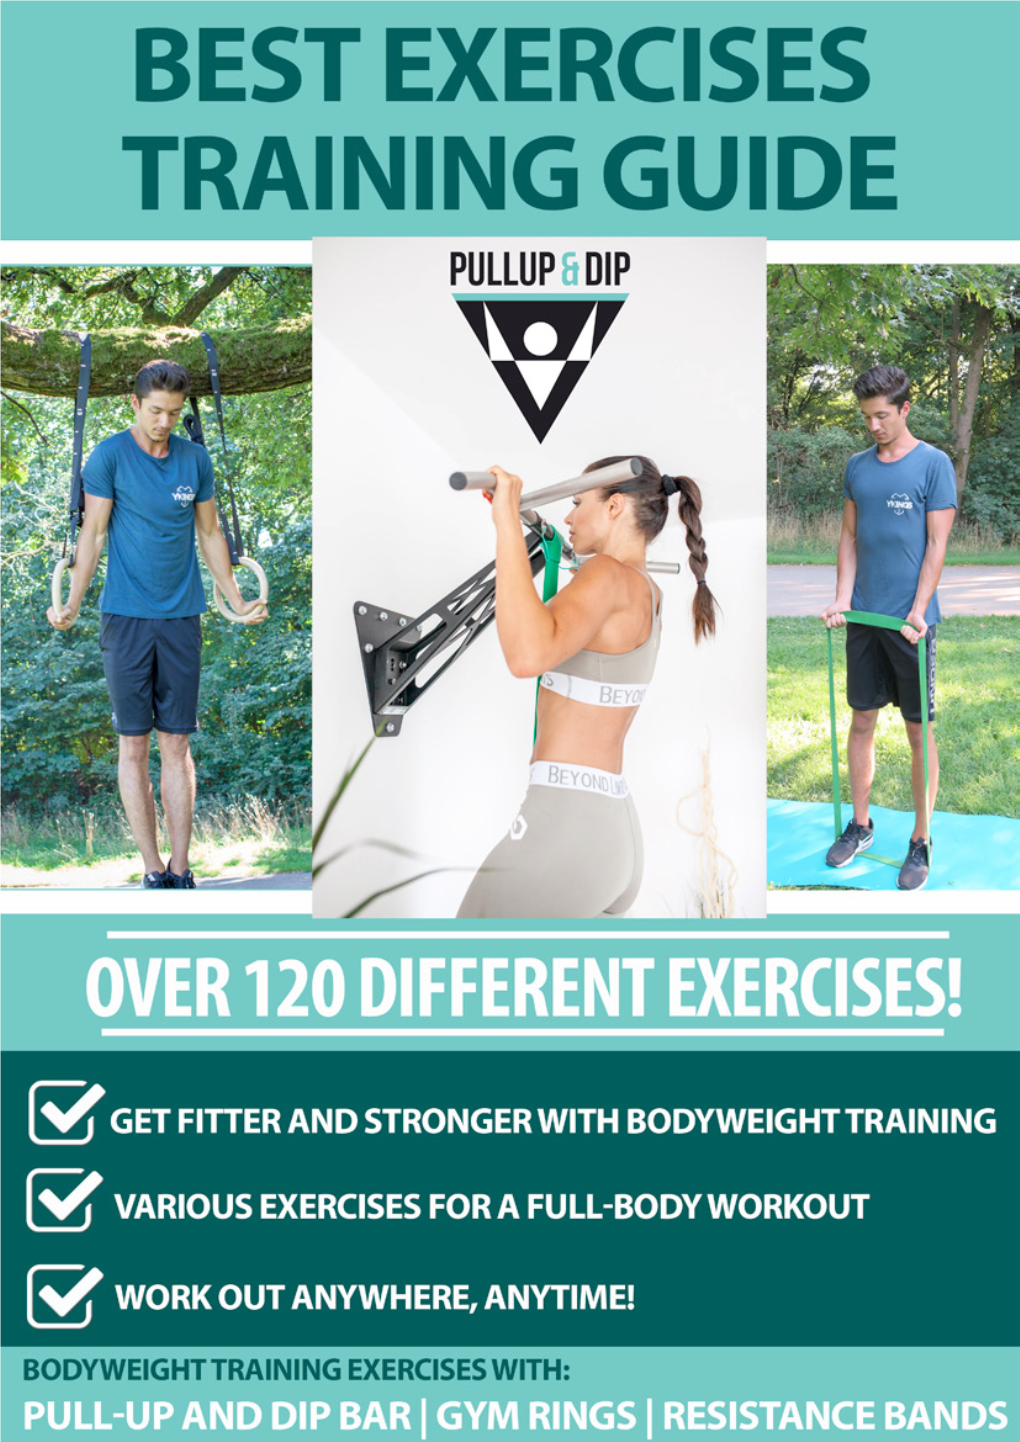 Exercises with Pullup & Dip Bar Chest